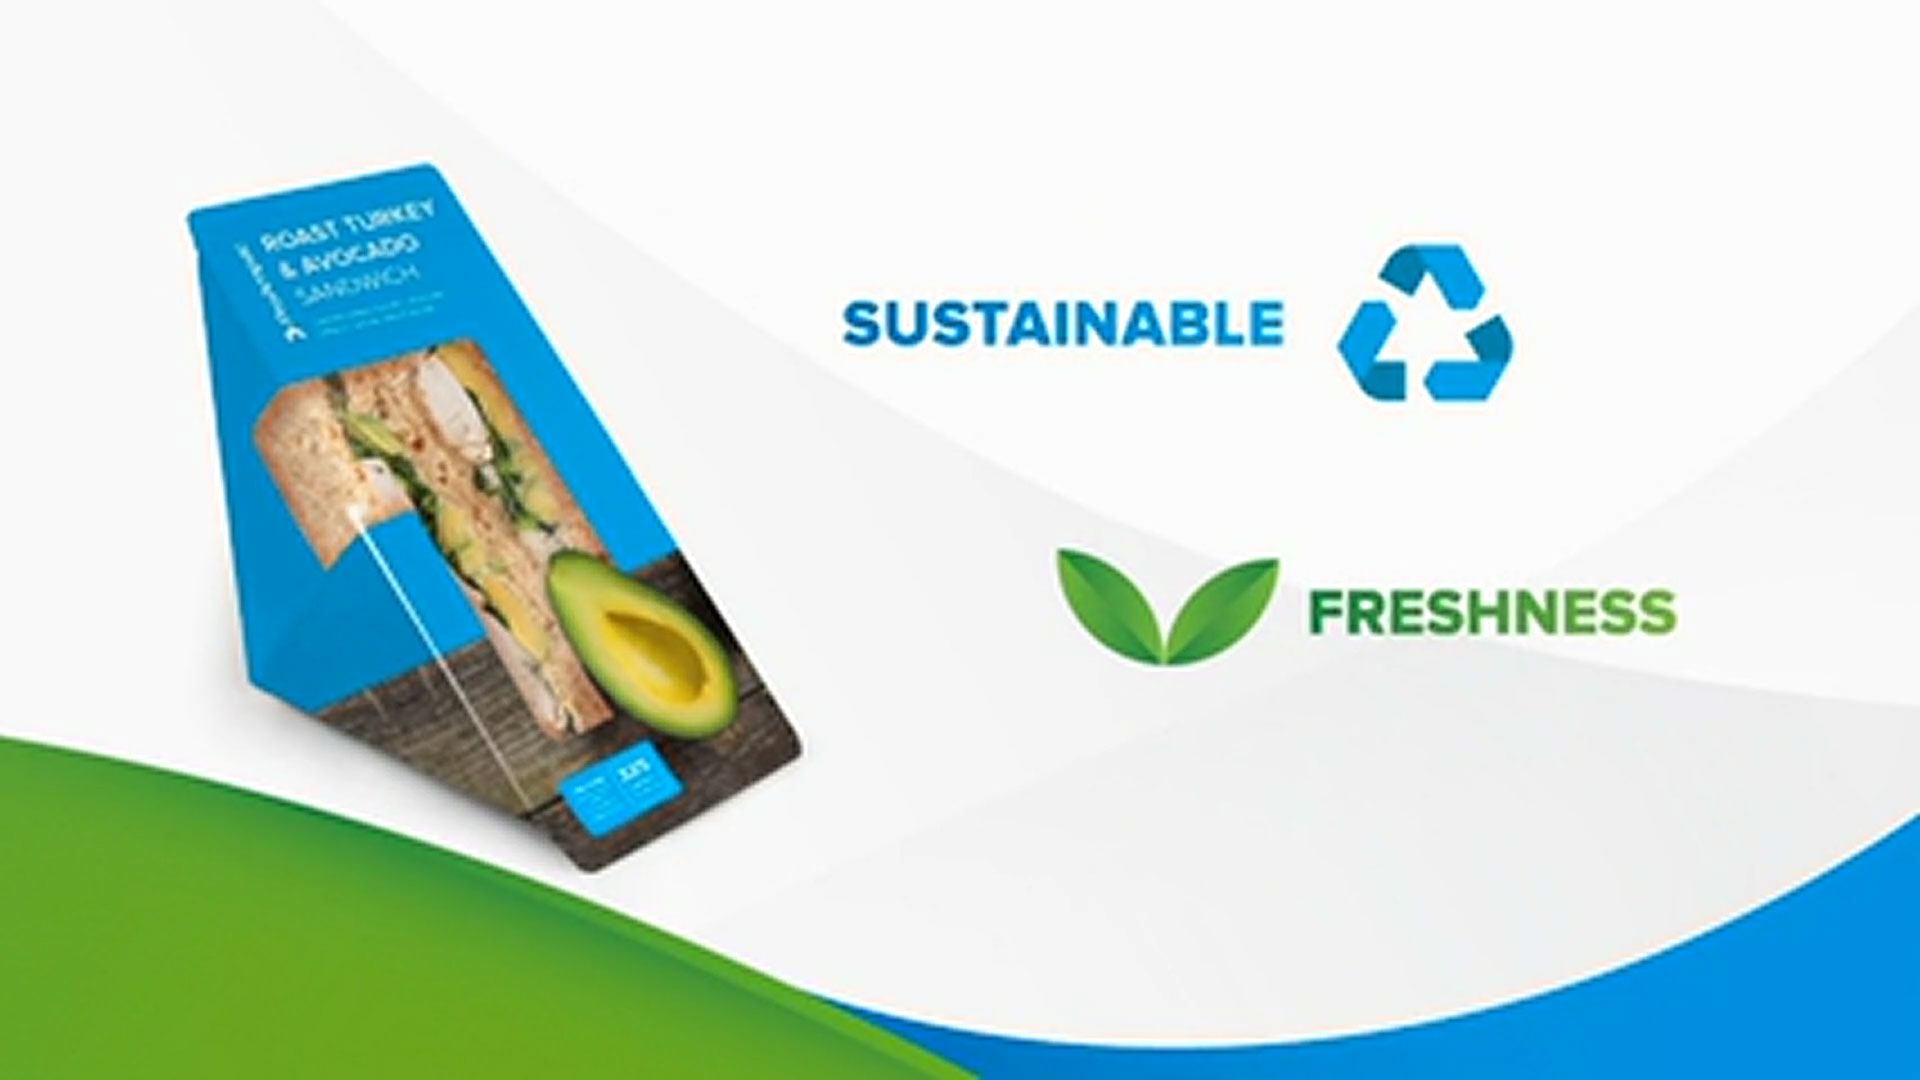 Watch here as ProAmpac introduces their Modified Atmosphere Packaging (MAP) that sets a new standard for freshness and sustainability in on-the-go meals.